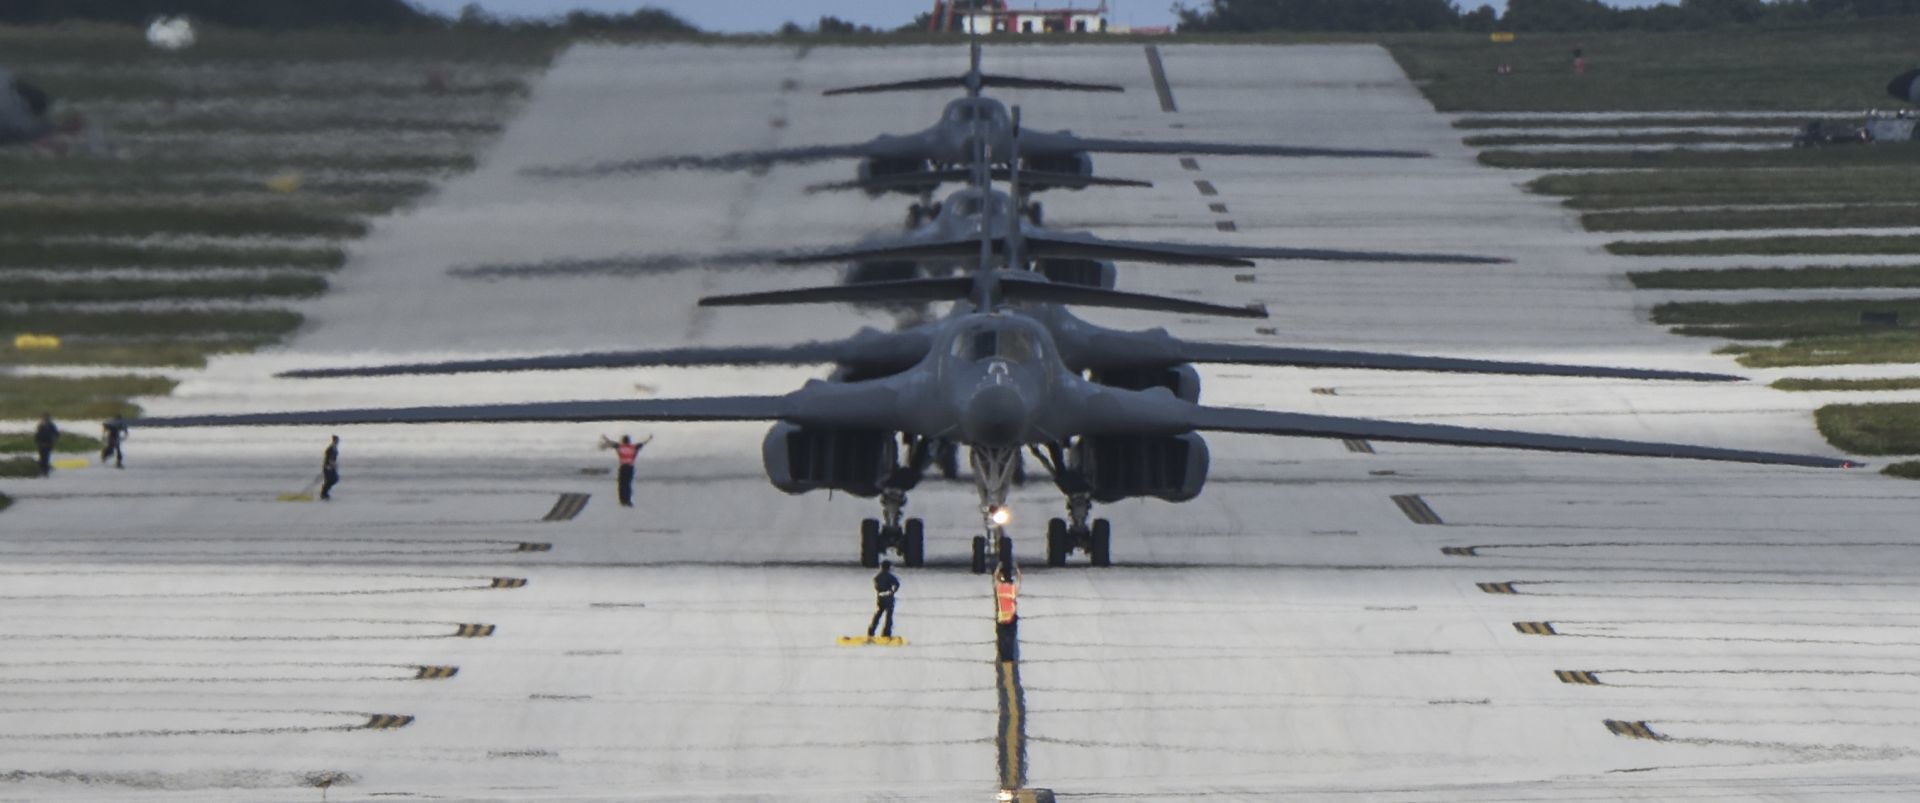 texas-based-b-1s-assume-pacom-s-continuous-bomber-presence-mission-01.jpg